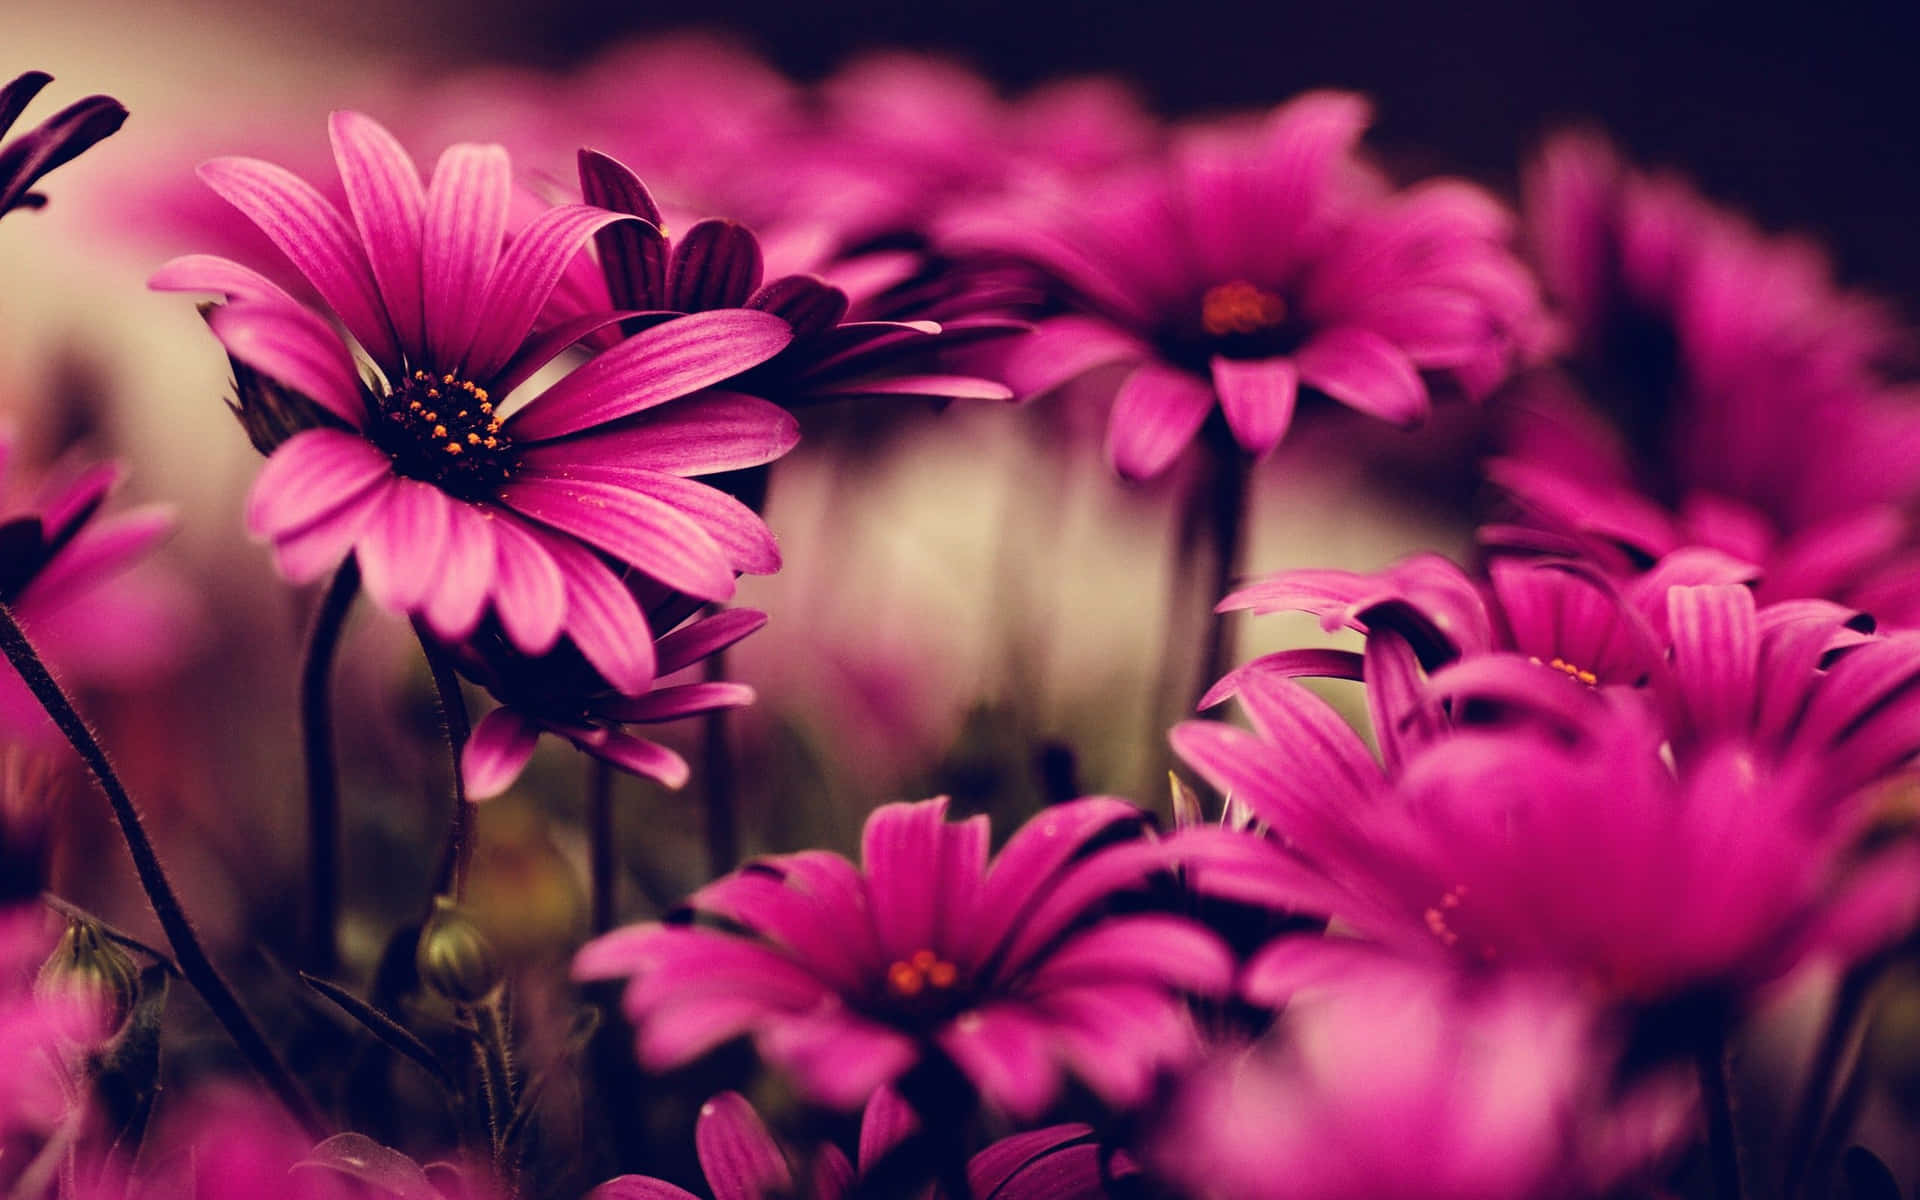 Enjoy a beautiful, natural moment with Pink Flower Phone Wallpaper